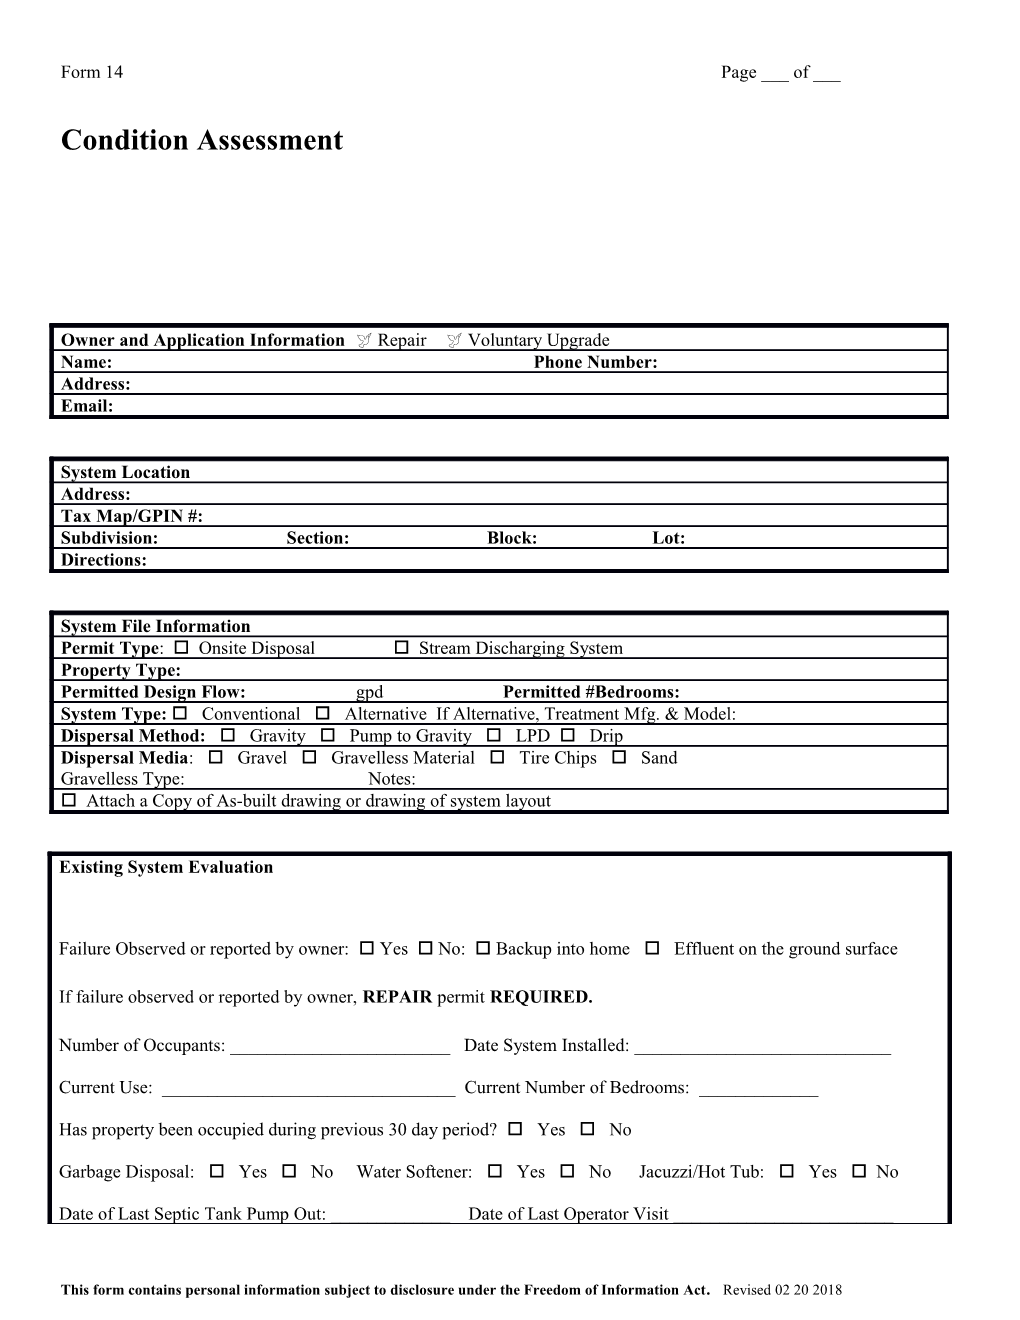 This Form Contains Personal Information Subject to Disclosure Under the Freedom of Information